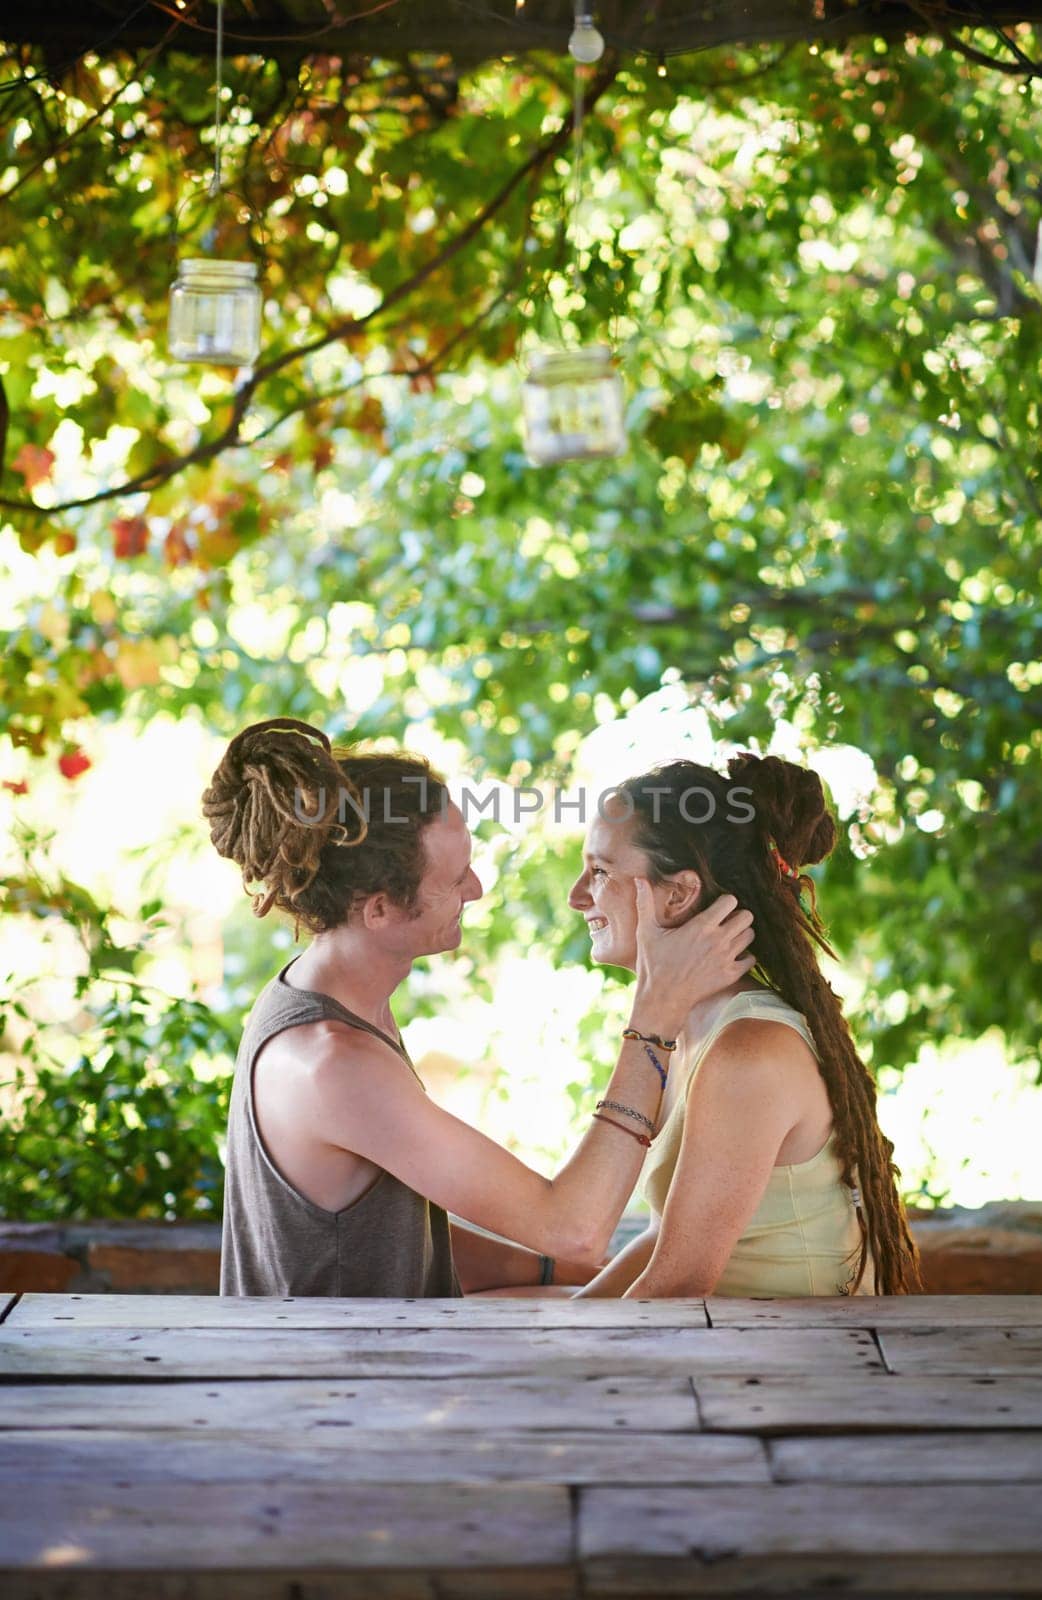 Outdoor, date and sunshine with couple, love and bonding together with romance and happiness. Park, smile or man with woman or cheerful with joy or relationship with marriage or fresh air with nature.